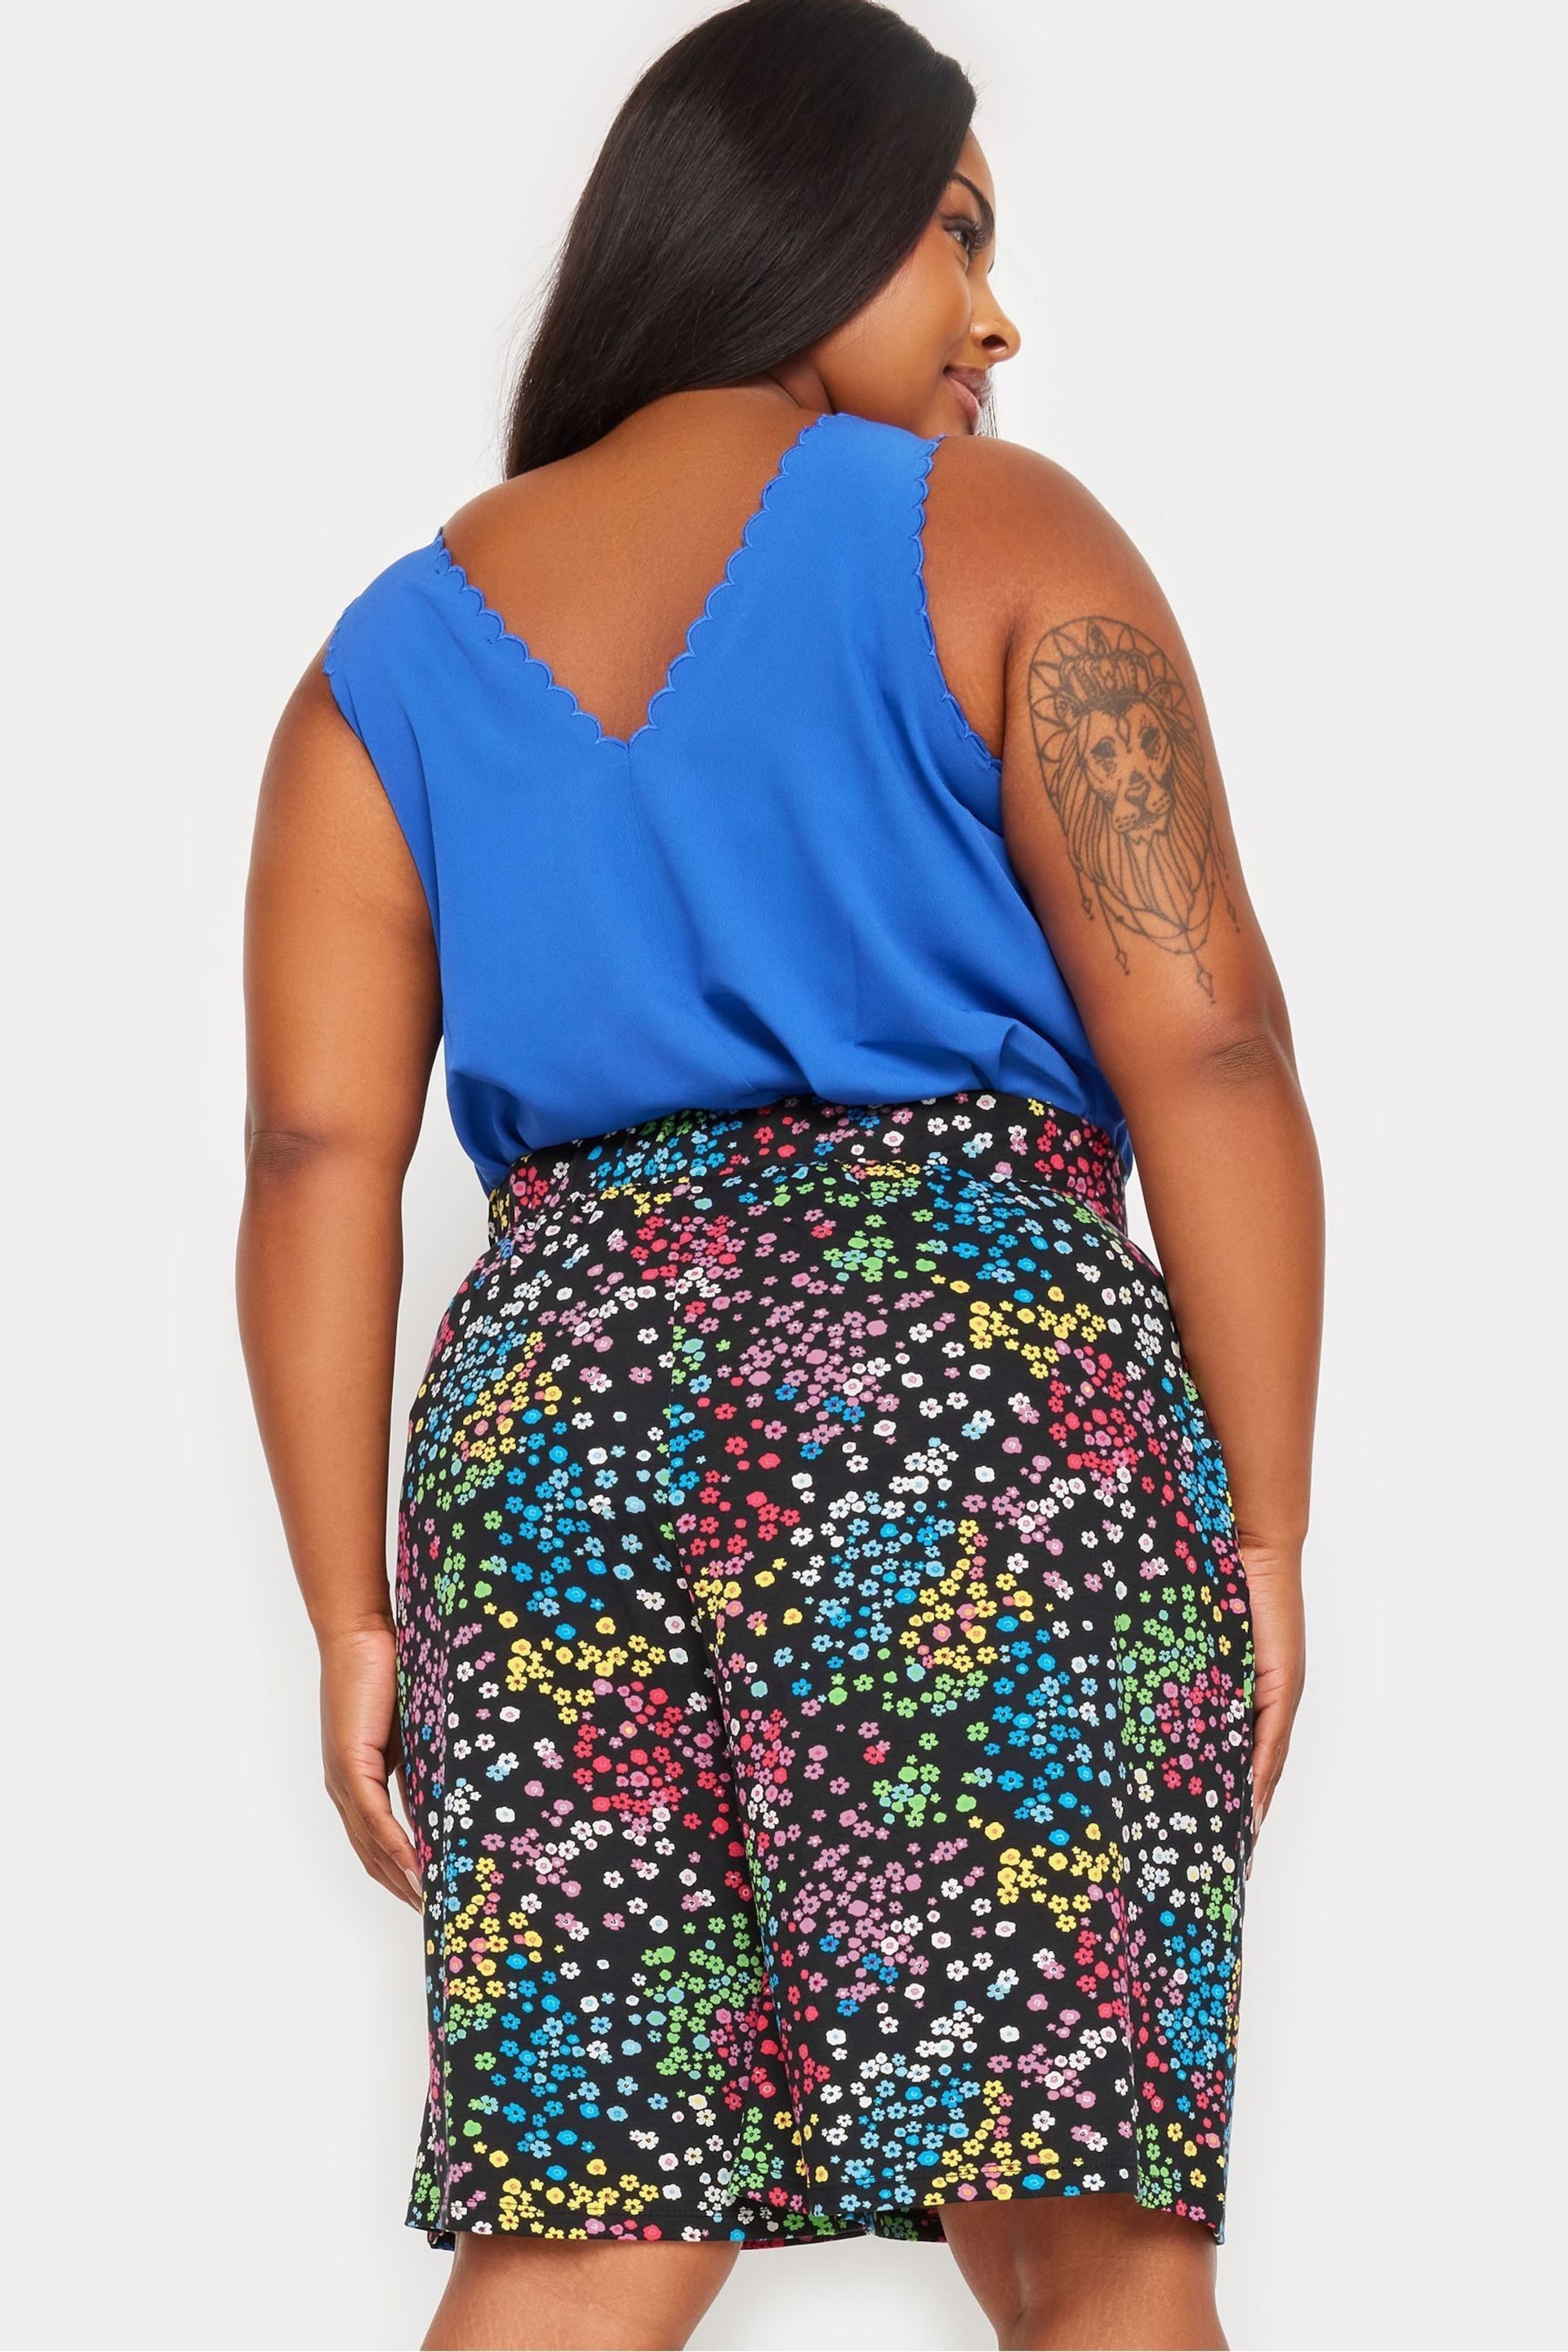 Yours Curve Black Rainbow Ditsy Floral Print Jersey Shorts - Image 3 of 6